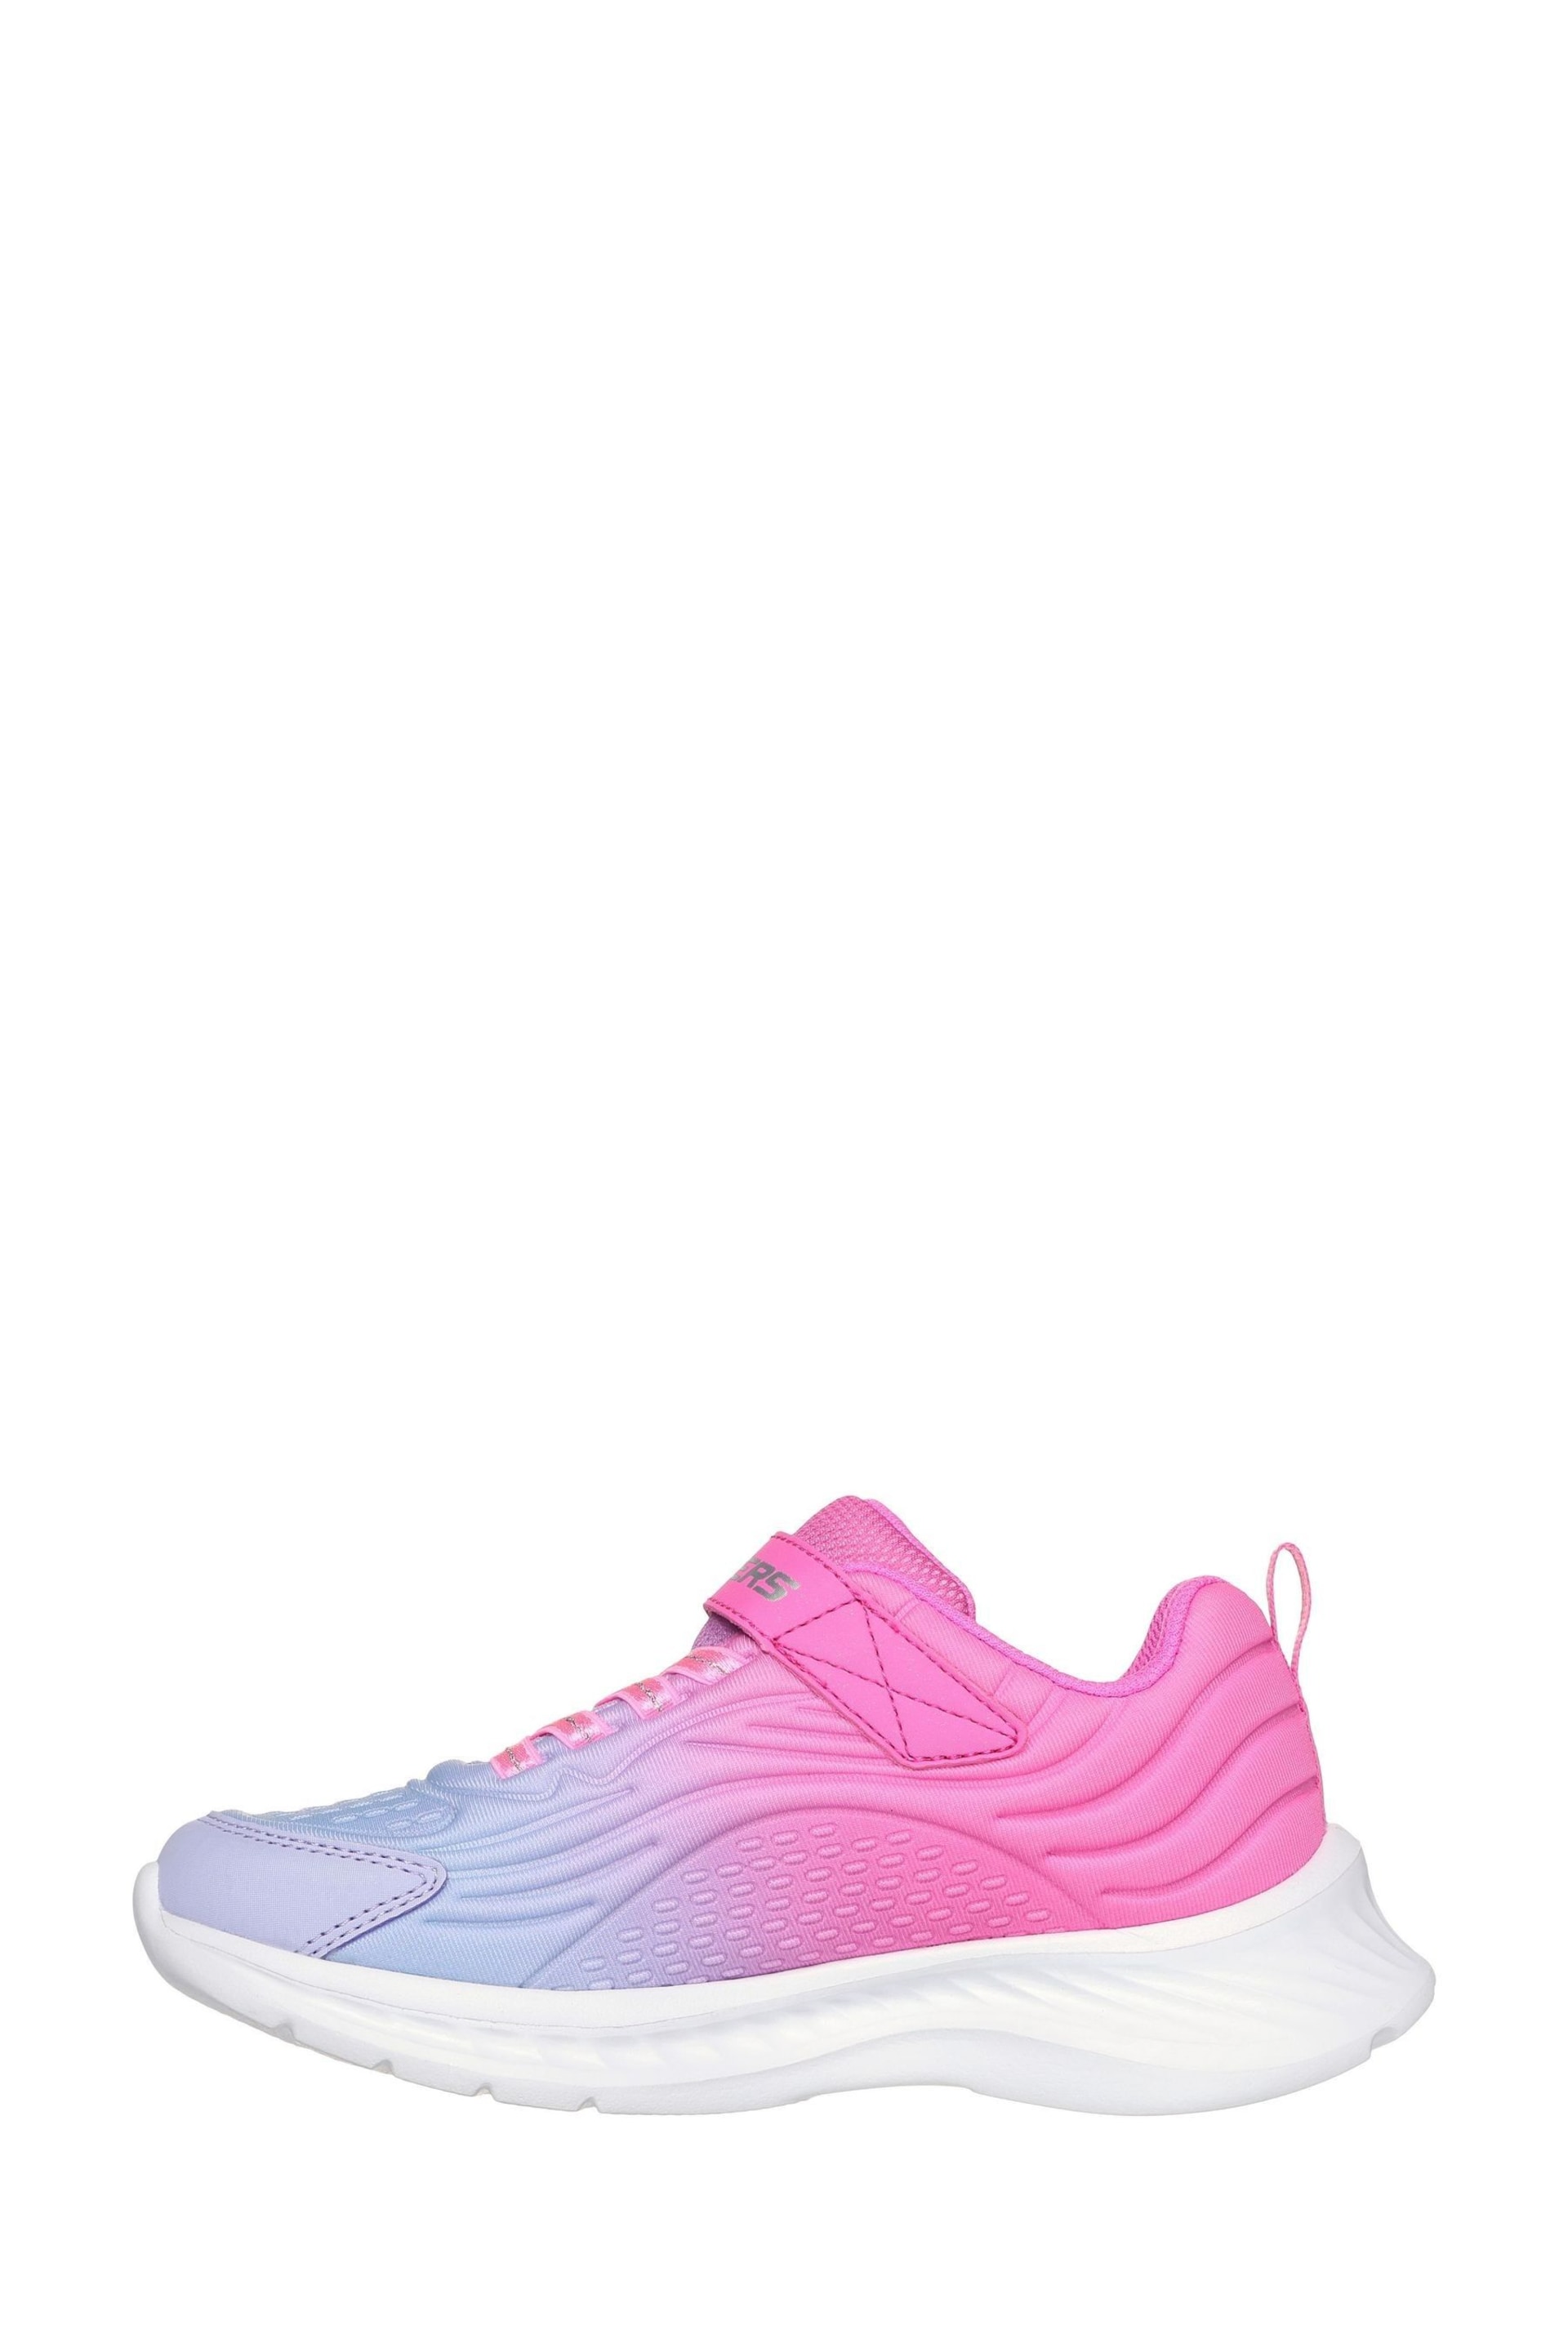 Skechers Pink Jumpsters Tech Trainers - Image 2 of 5